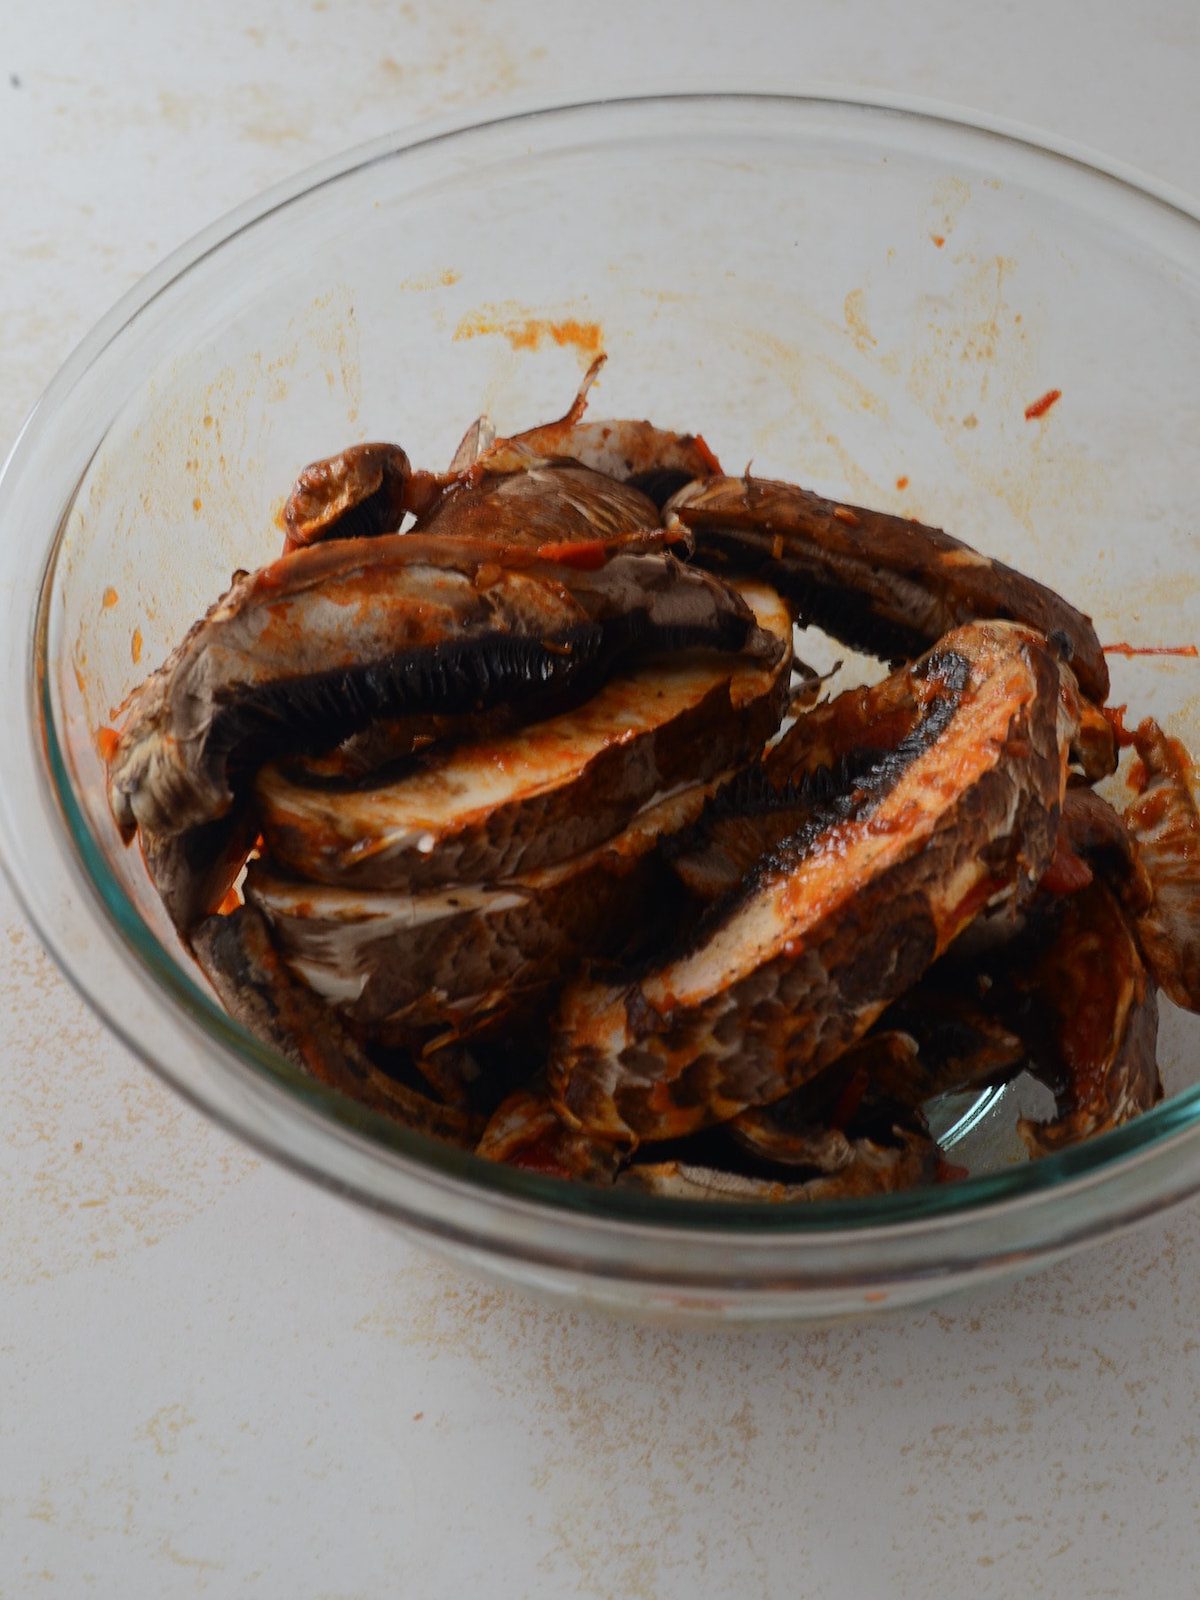 This is a photo of marinated sliced portobellos.